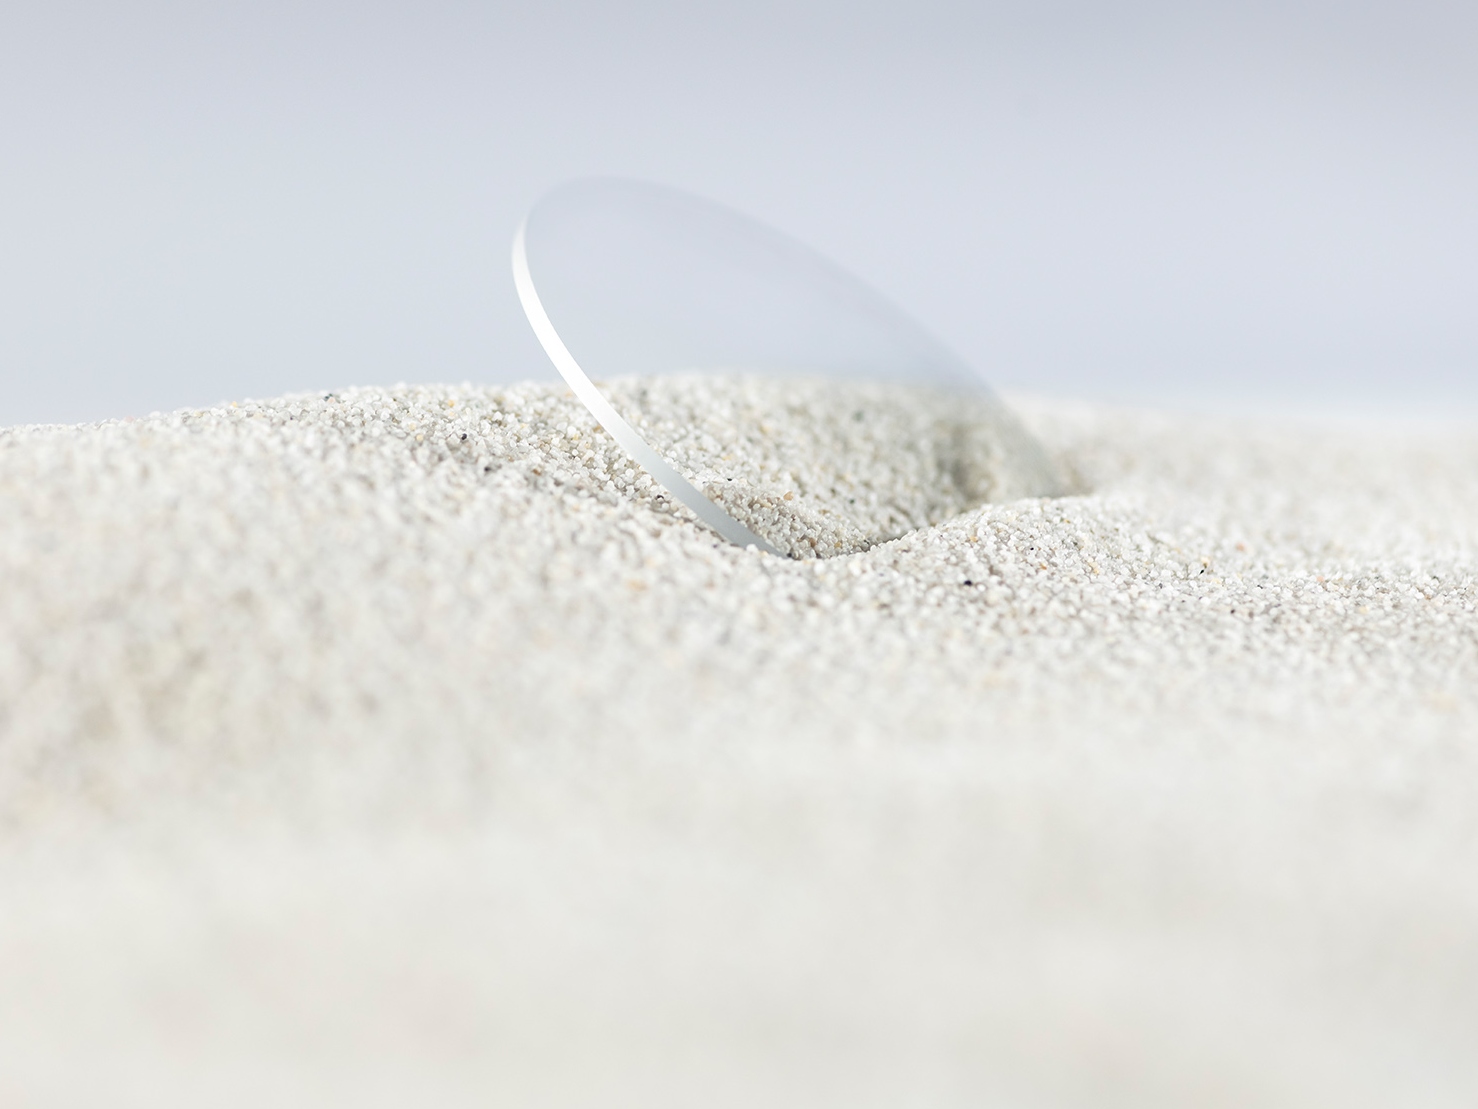 A ZEISS lens with a durable coating is covered in rough sand but still scratch free.